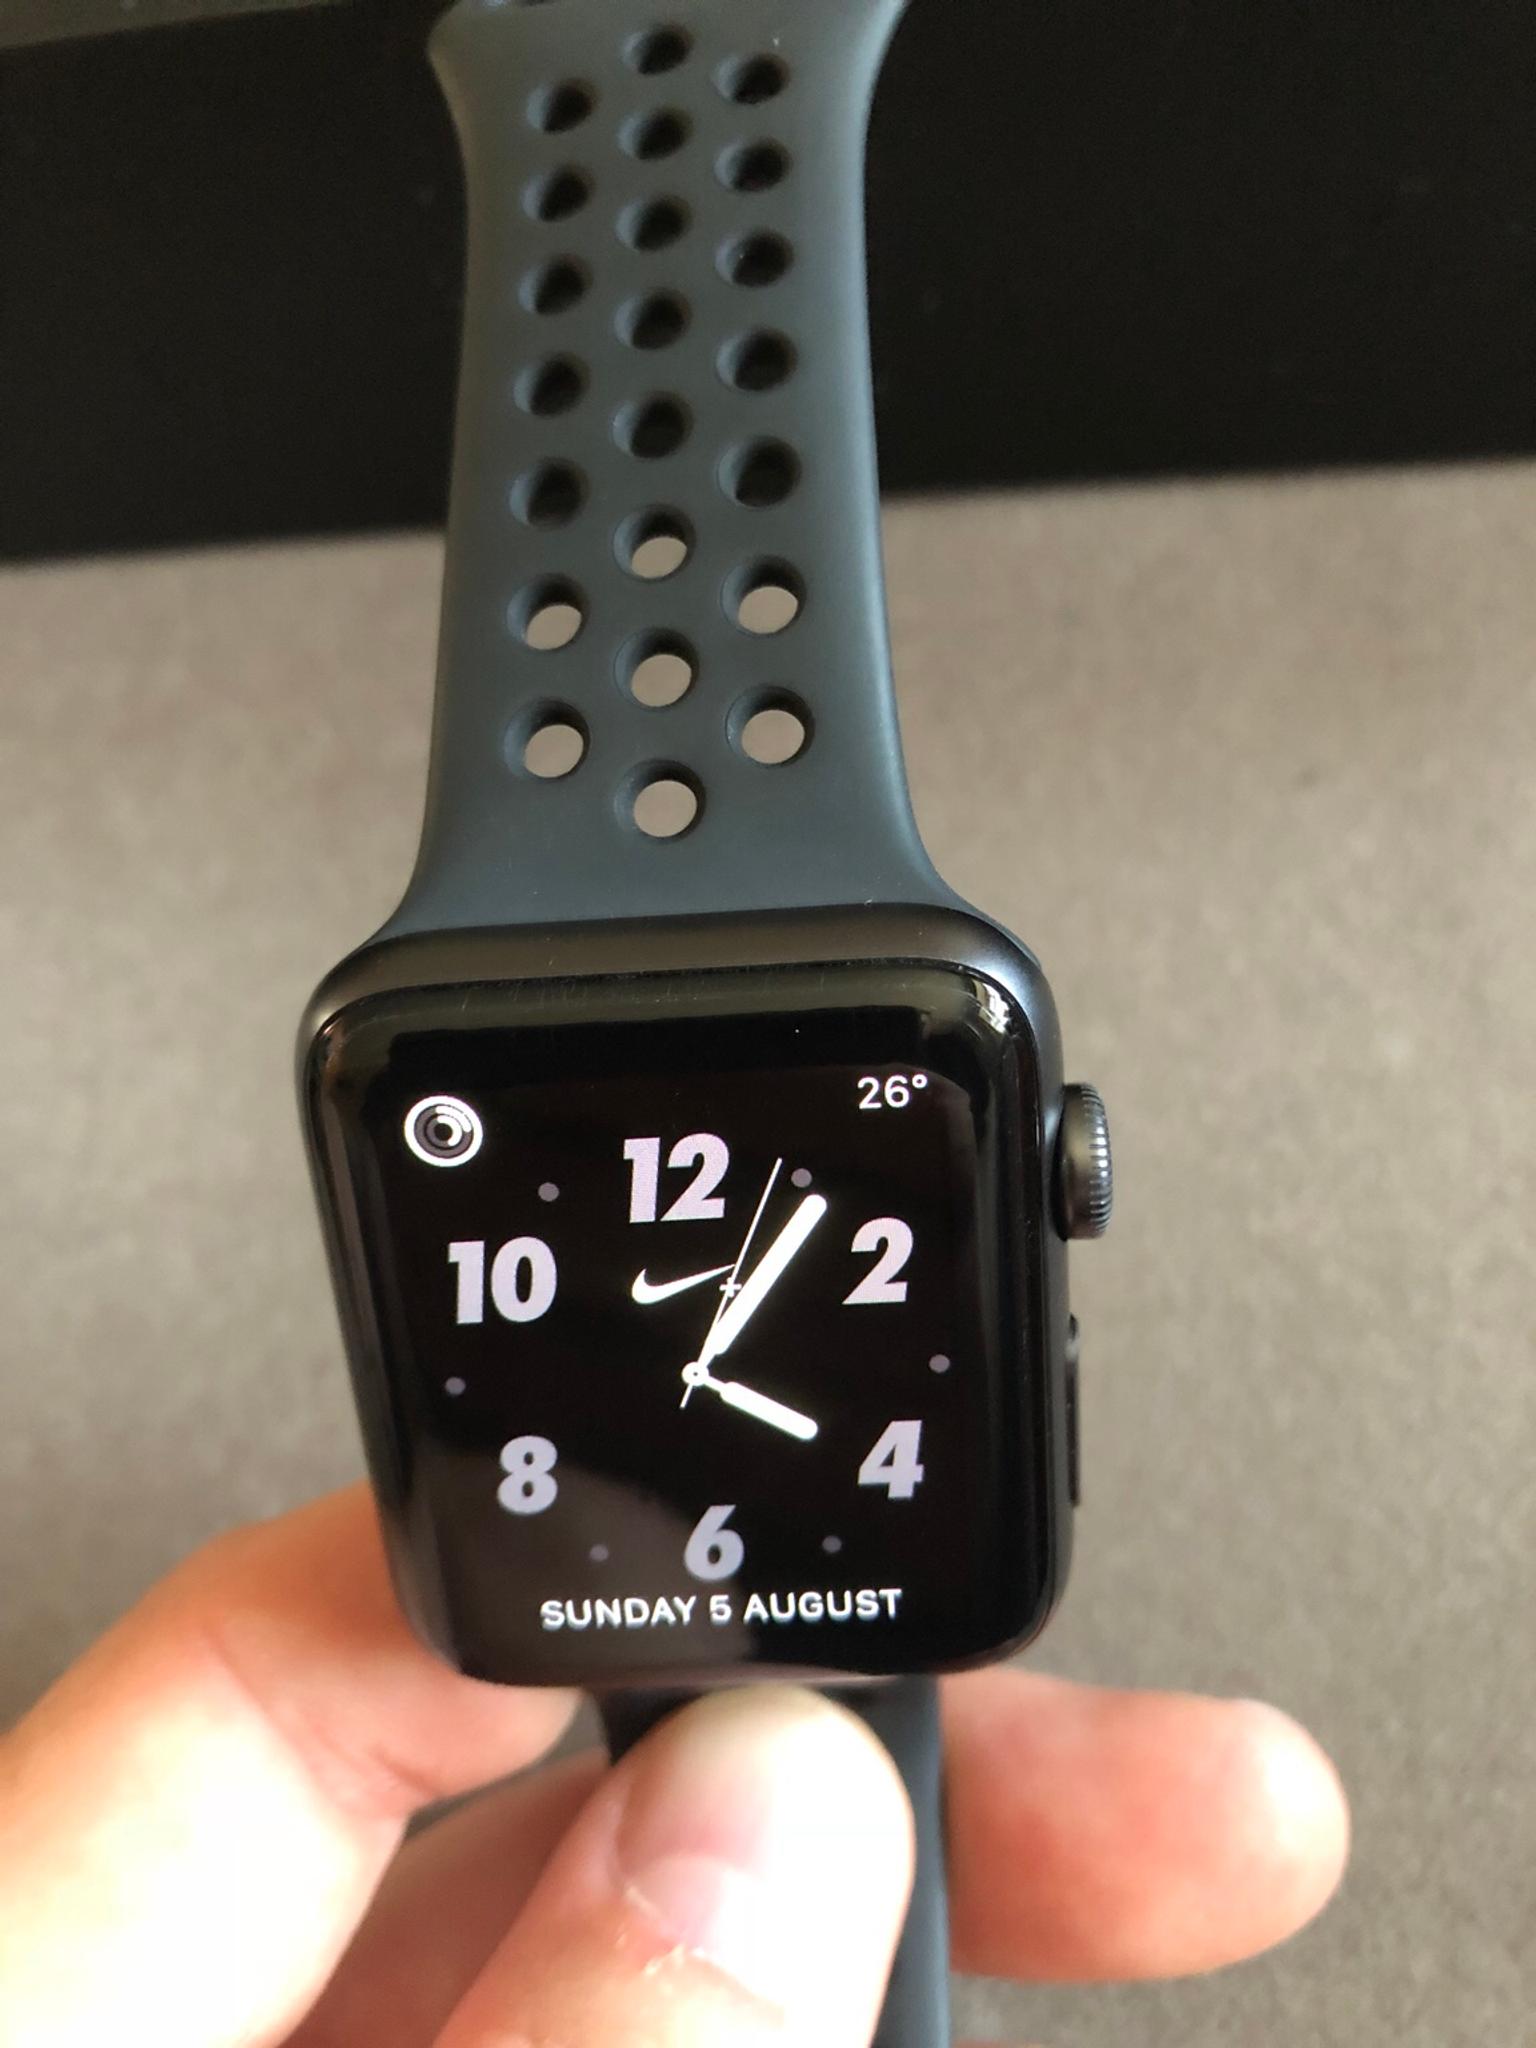 apple watch series 5 nike anthracite